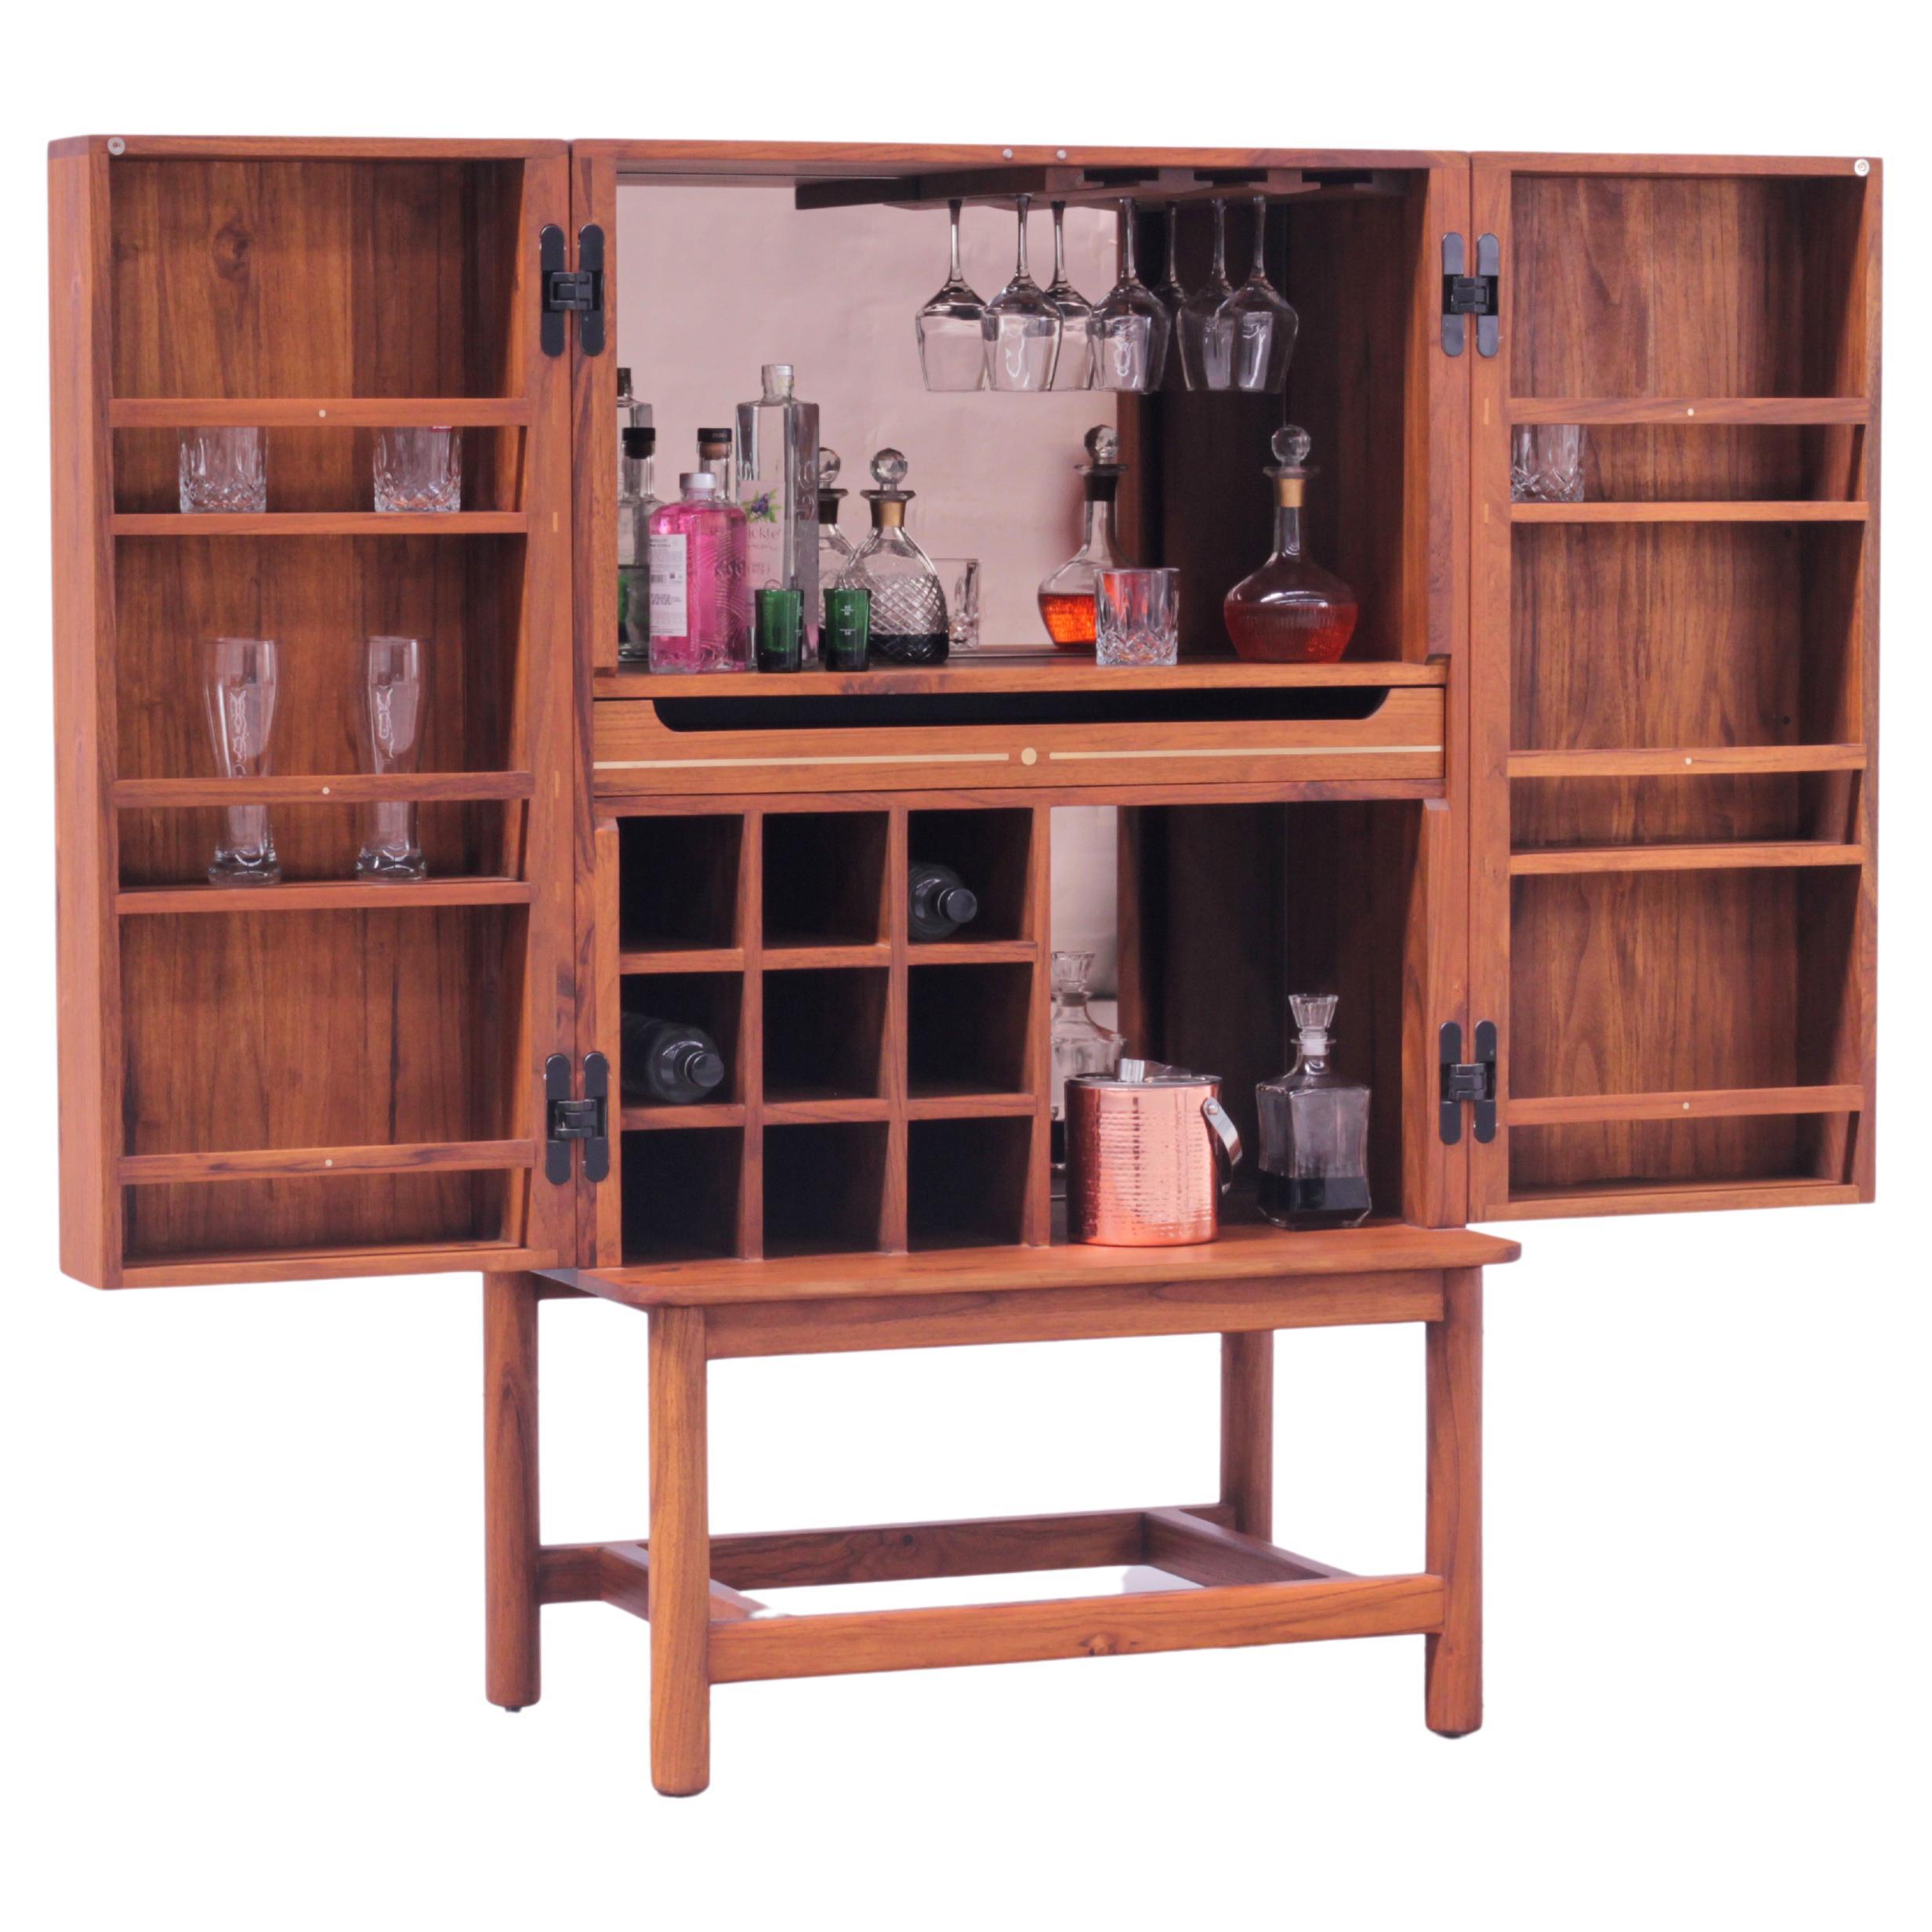 Suave is a hide-a-bar cabinet handcrafted entirely in American Oak wood with brass inlay and details. You can use it as a standalone piece of furniture for everyday living. But when it's time to celebrate, simply open the doors and unleash its